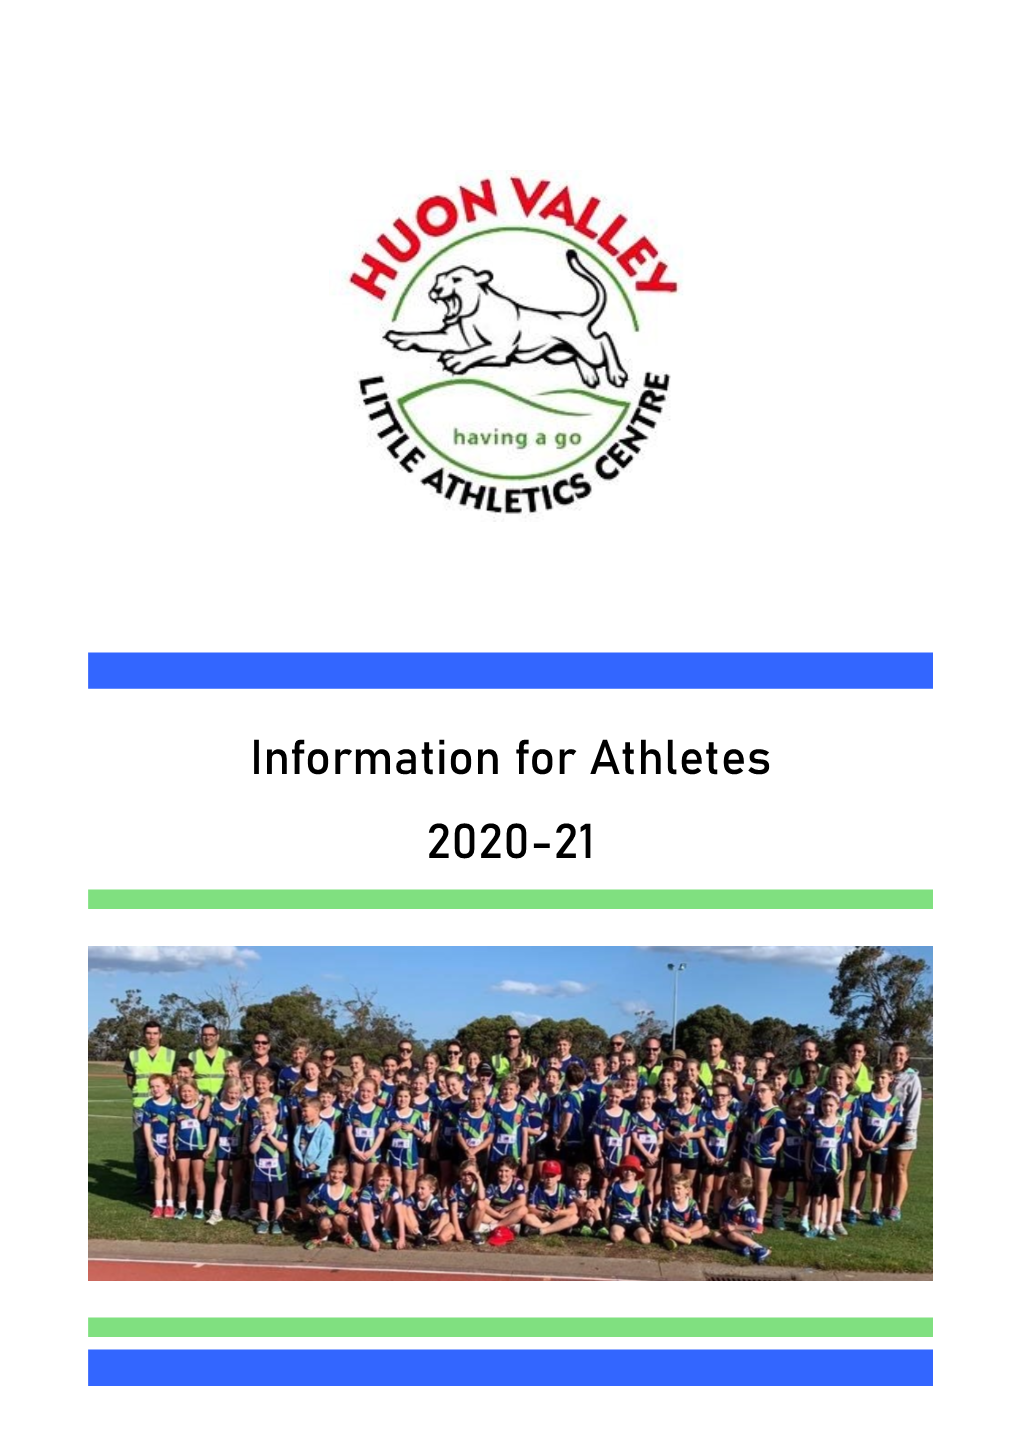 Information for Athletes 2020-21